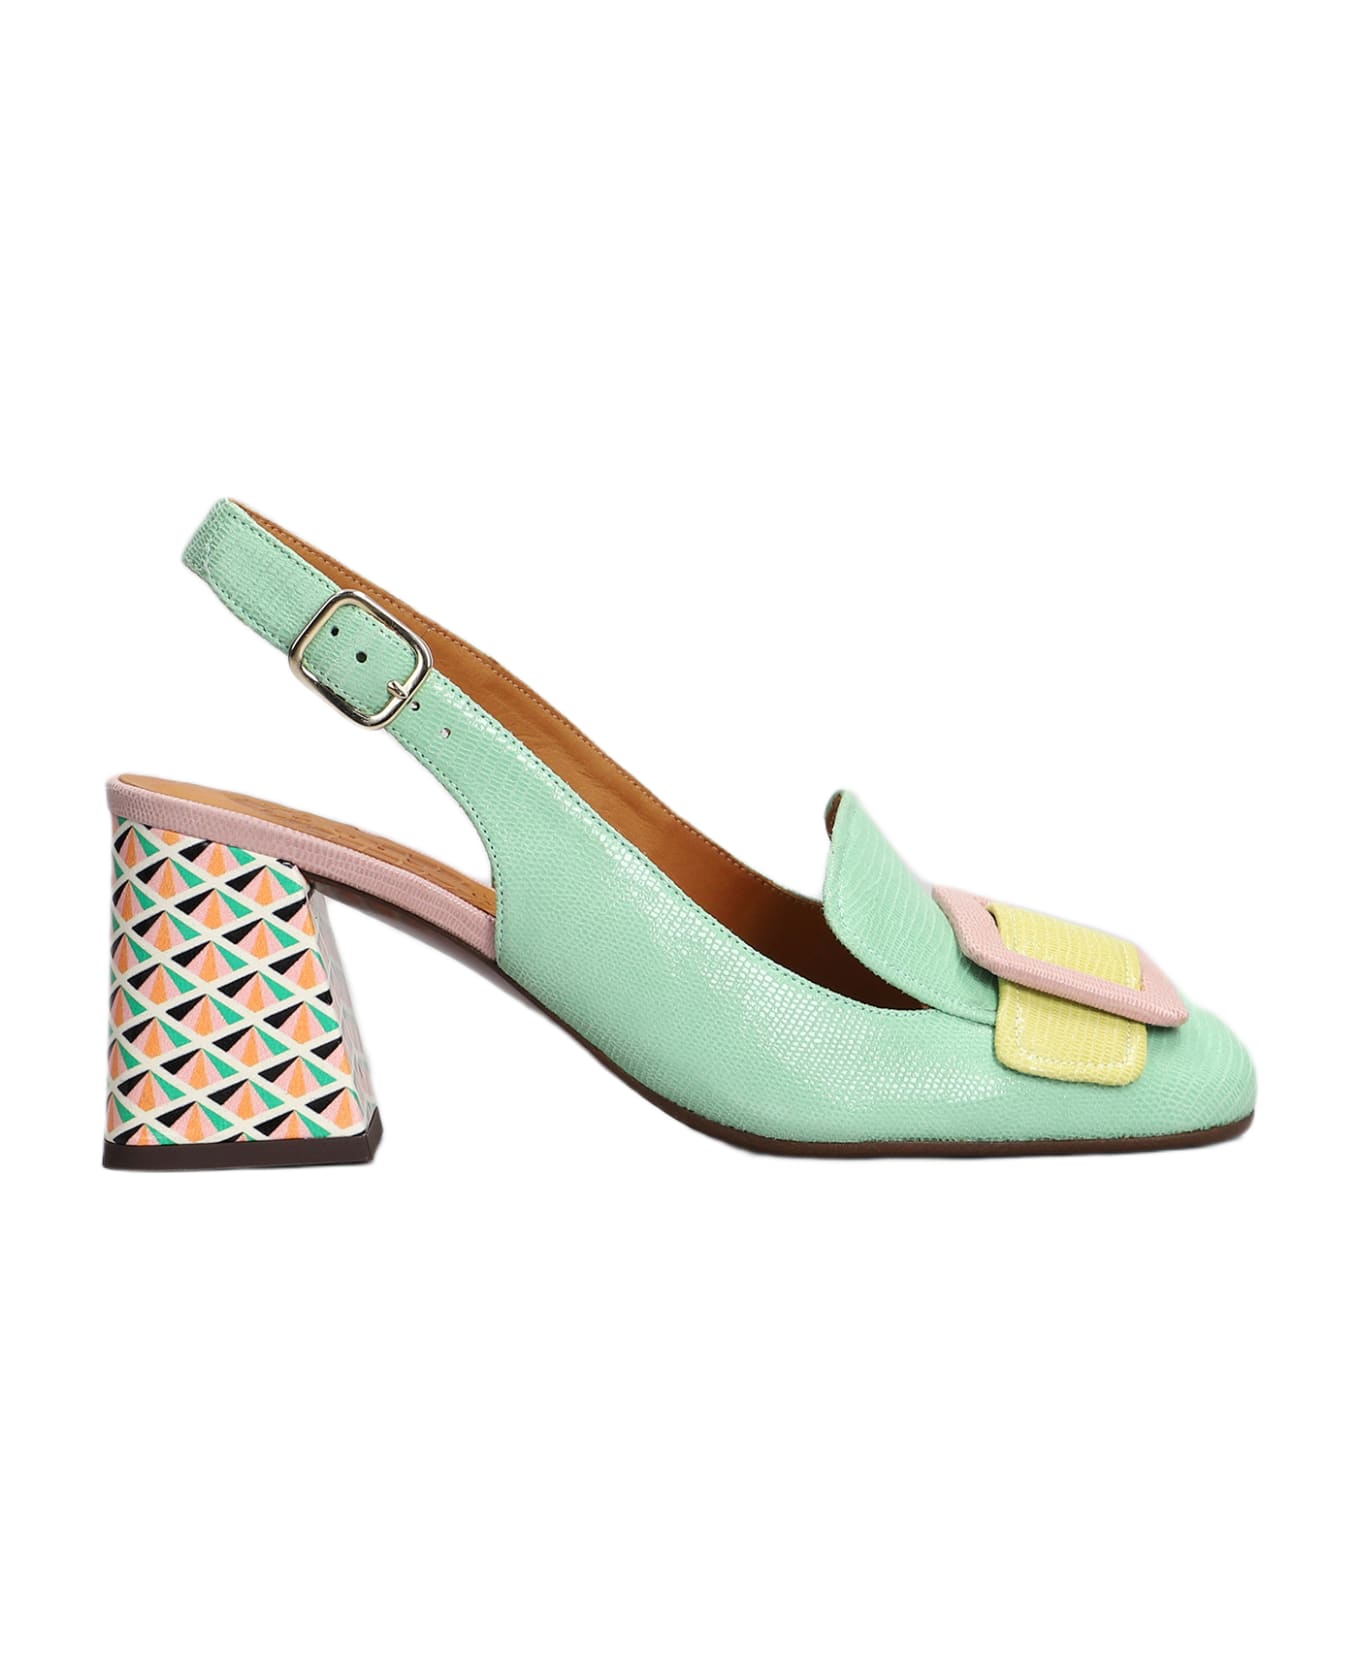 Chie Mihara Suzan Pumps In Green Leather - green